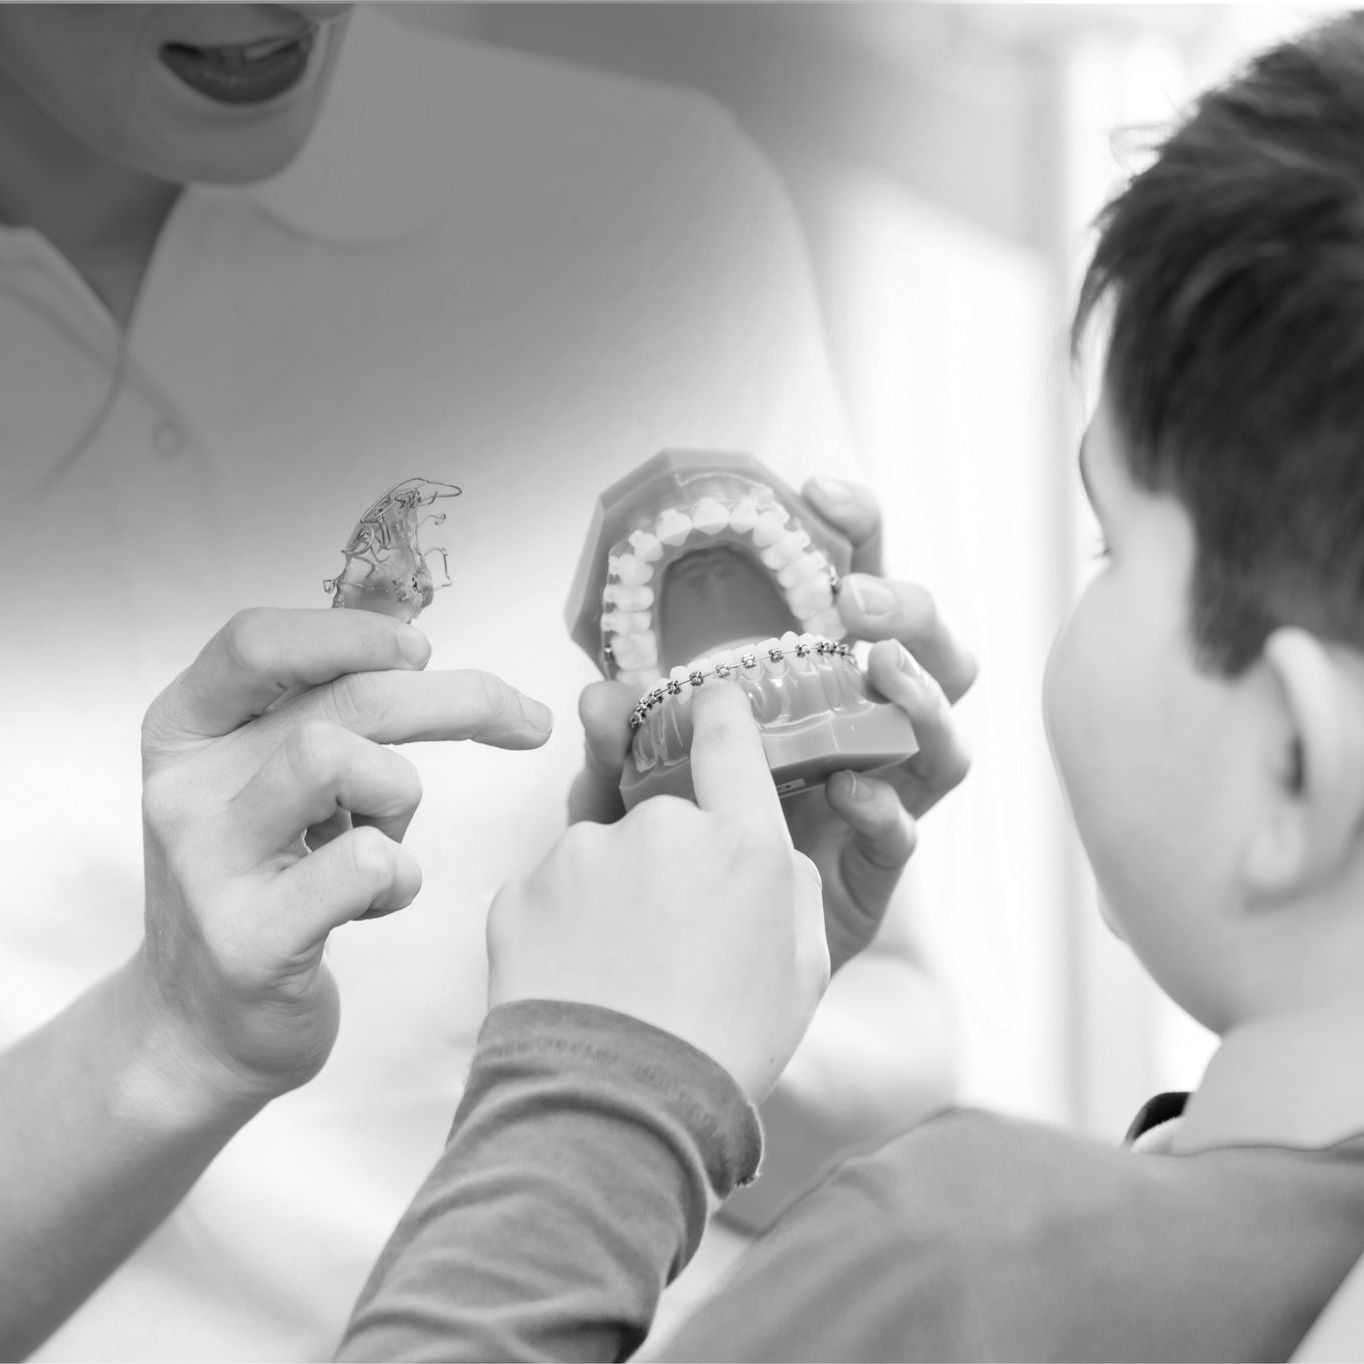 a female orthodontist showing a boy how braces will fit on a model of teeth